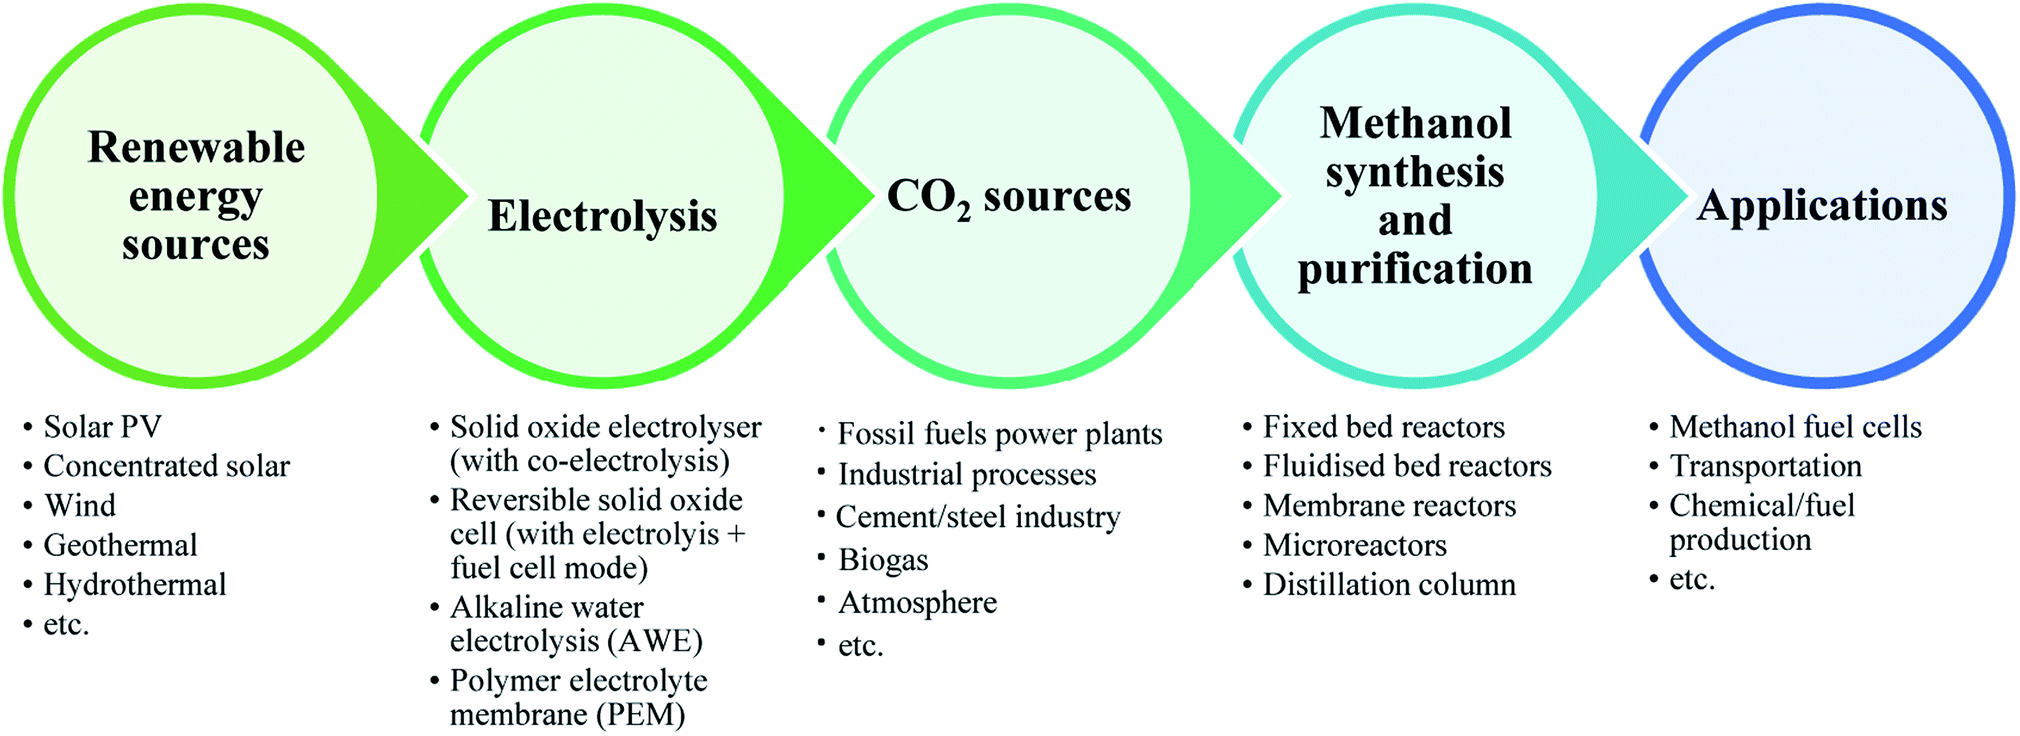 Power-to-methanol process: a review of electrolysis, methanol catalysts,  kinetics, reactor designs and modelling, process integration, optimisation,  a  - Sustainable Energy & Fuels (RSC Publishing) DOI:10.1039/D1SE00635E